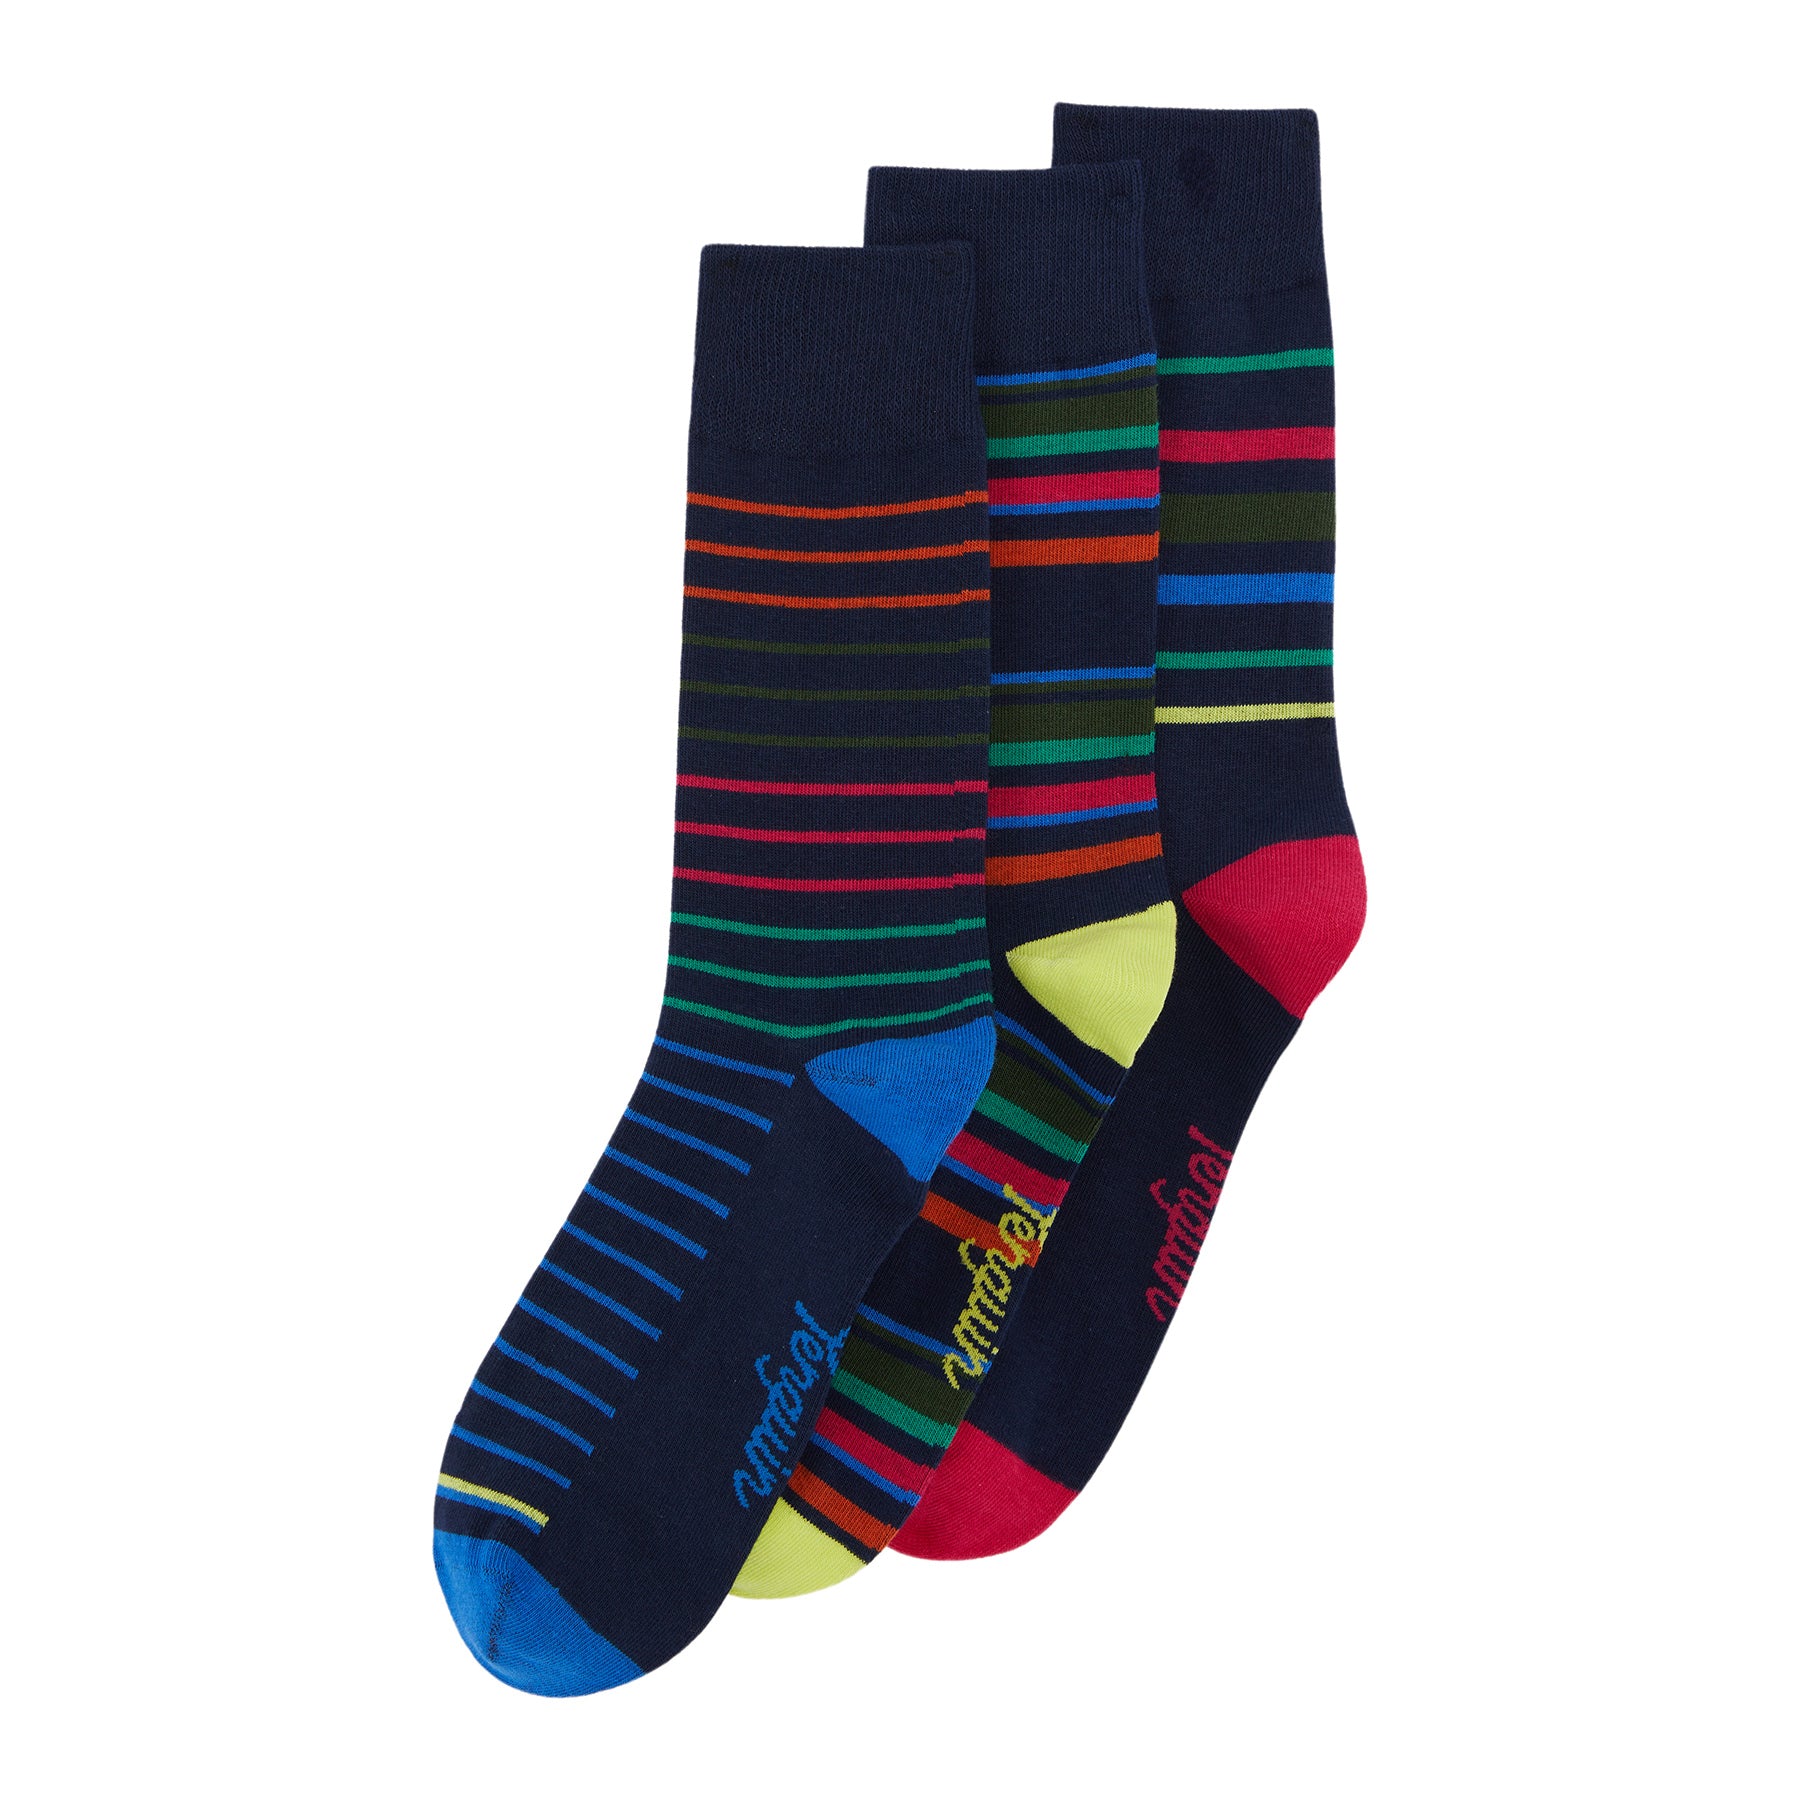 View 3 Pack Stripe And Spot Design Ankle Socks In Black And Blue information